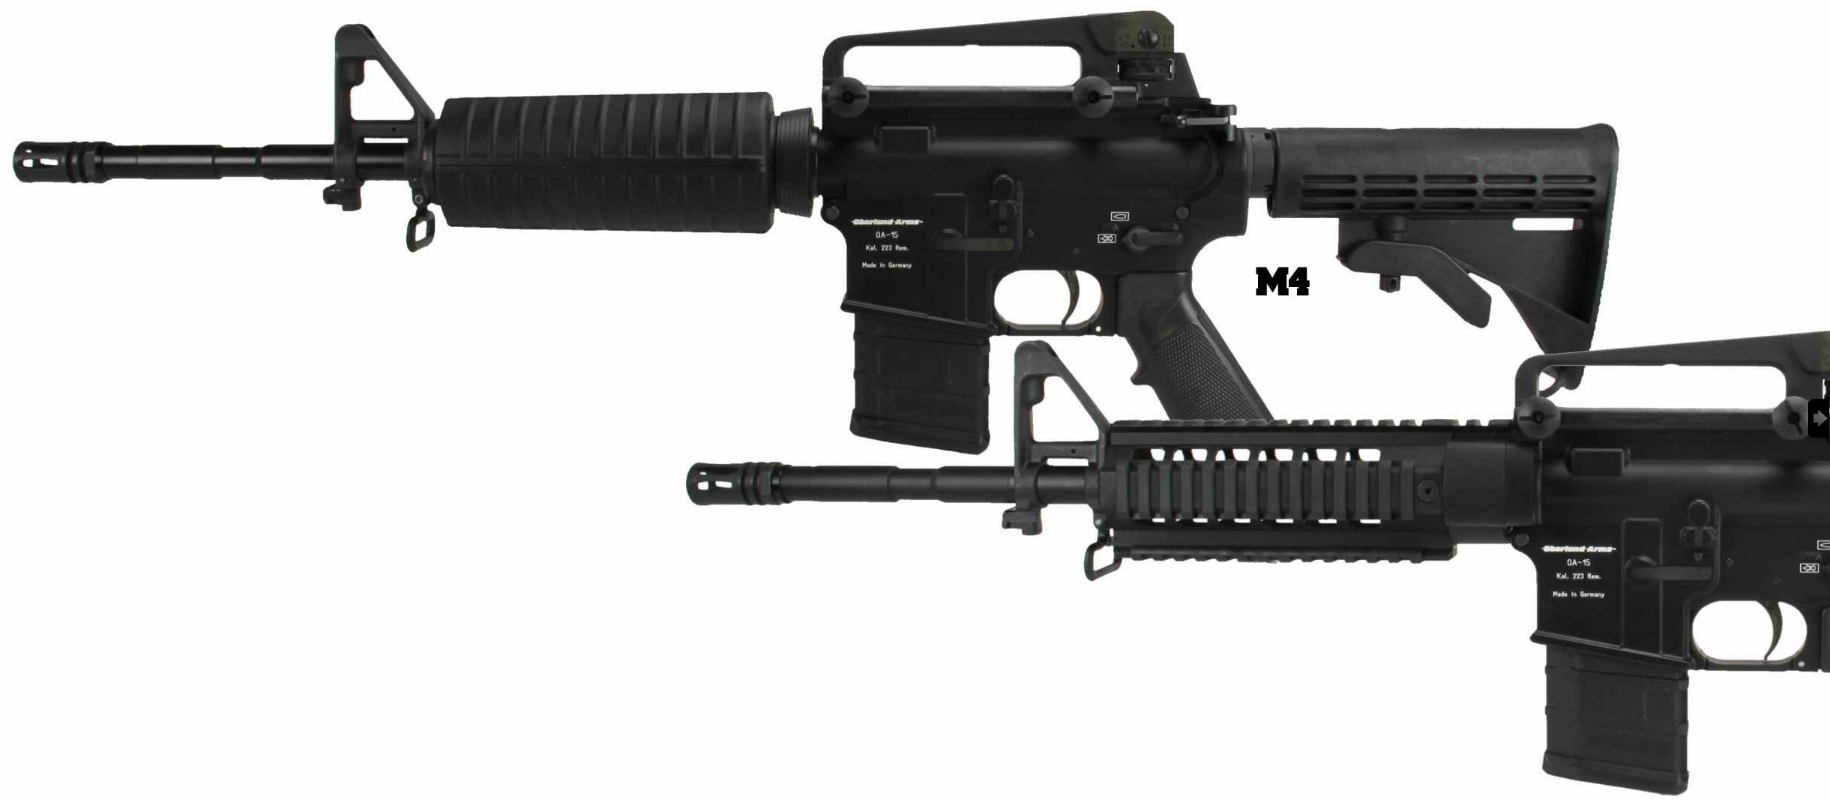 Oberland Arms OA-15 M4